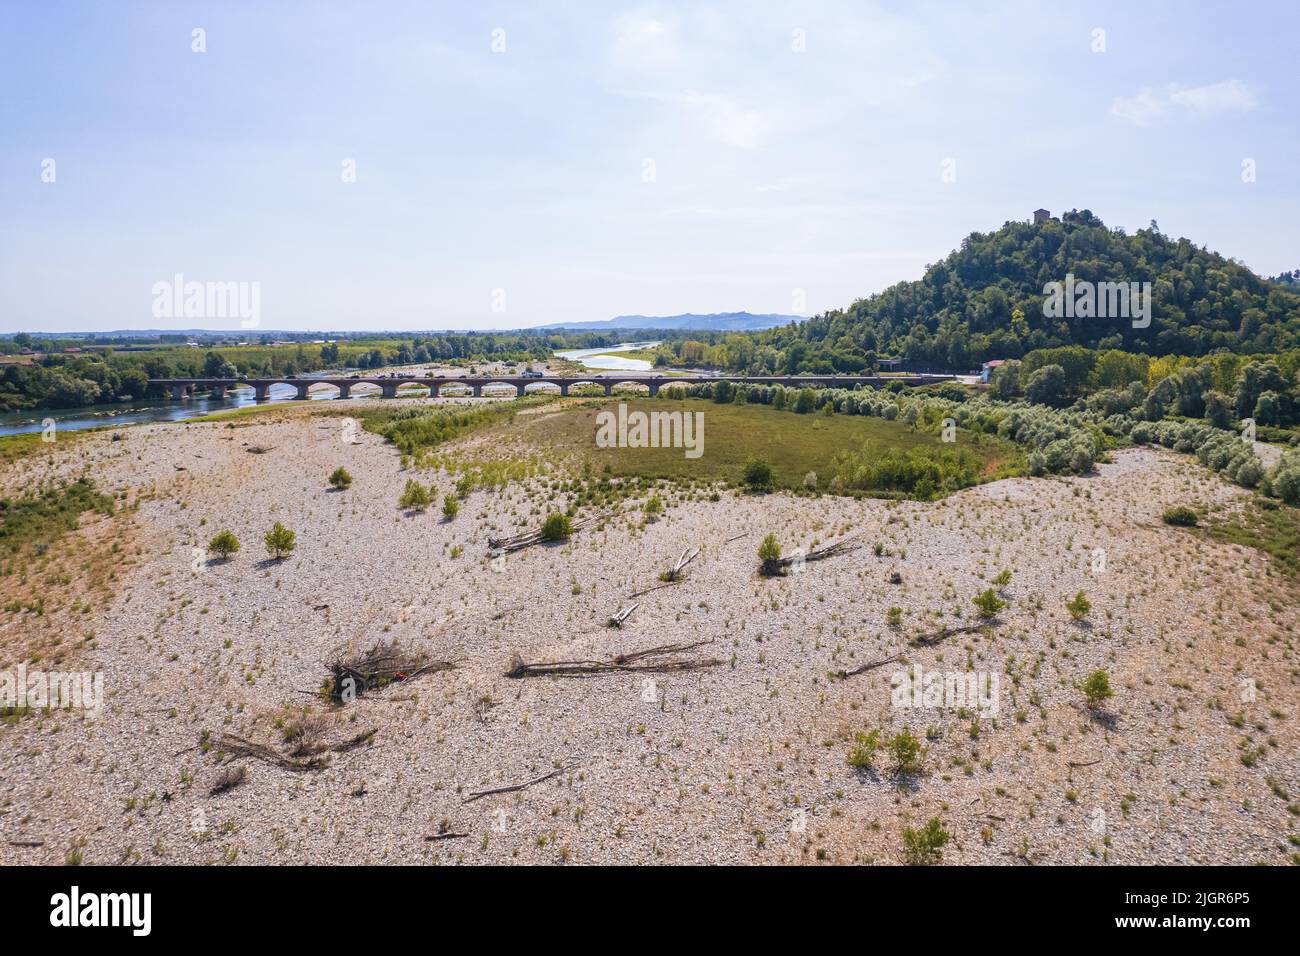 Unprecedented drought in the Po River due to long lack of rainfall. Verrua Savoia, Italy - July 2022 Stock Photo